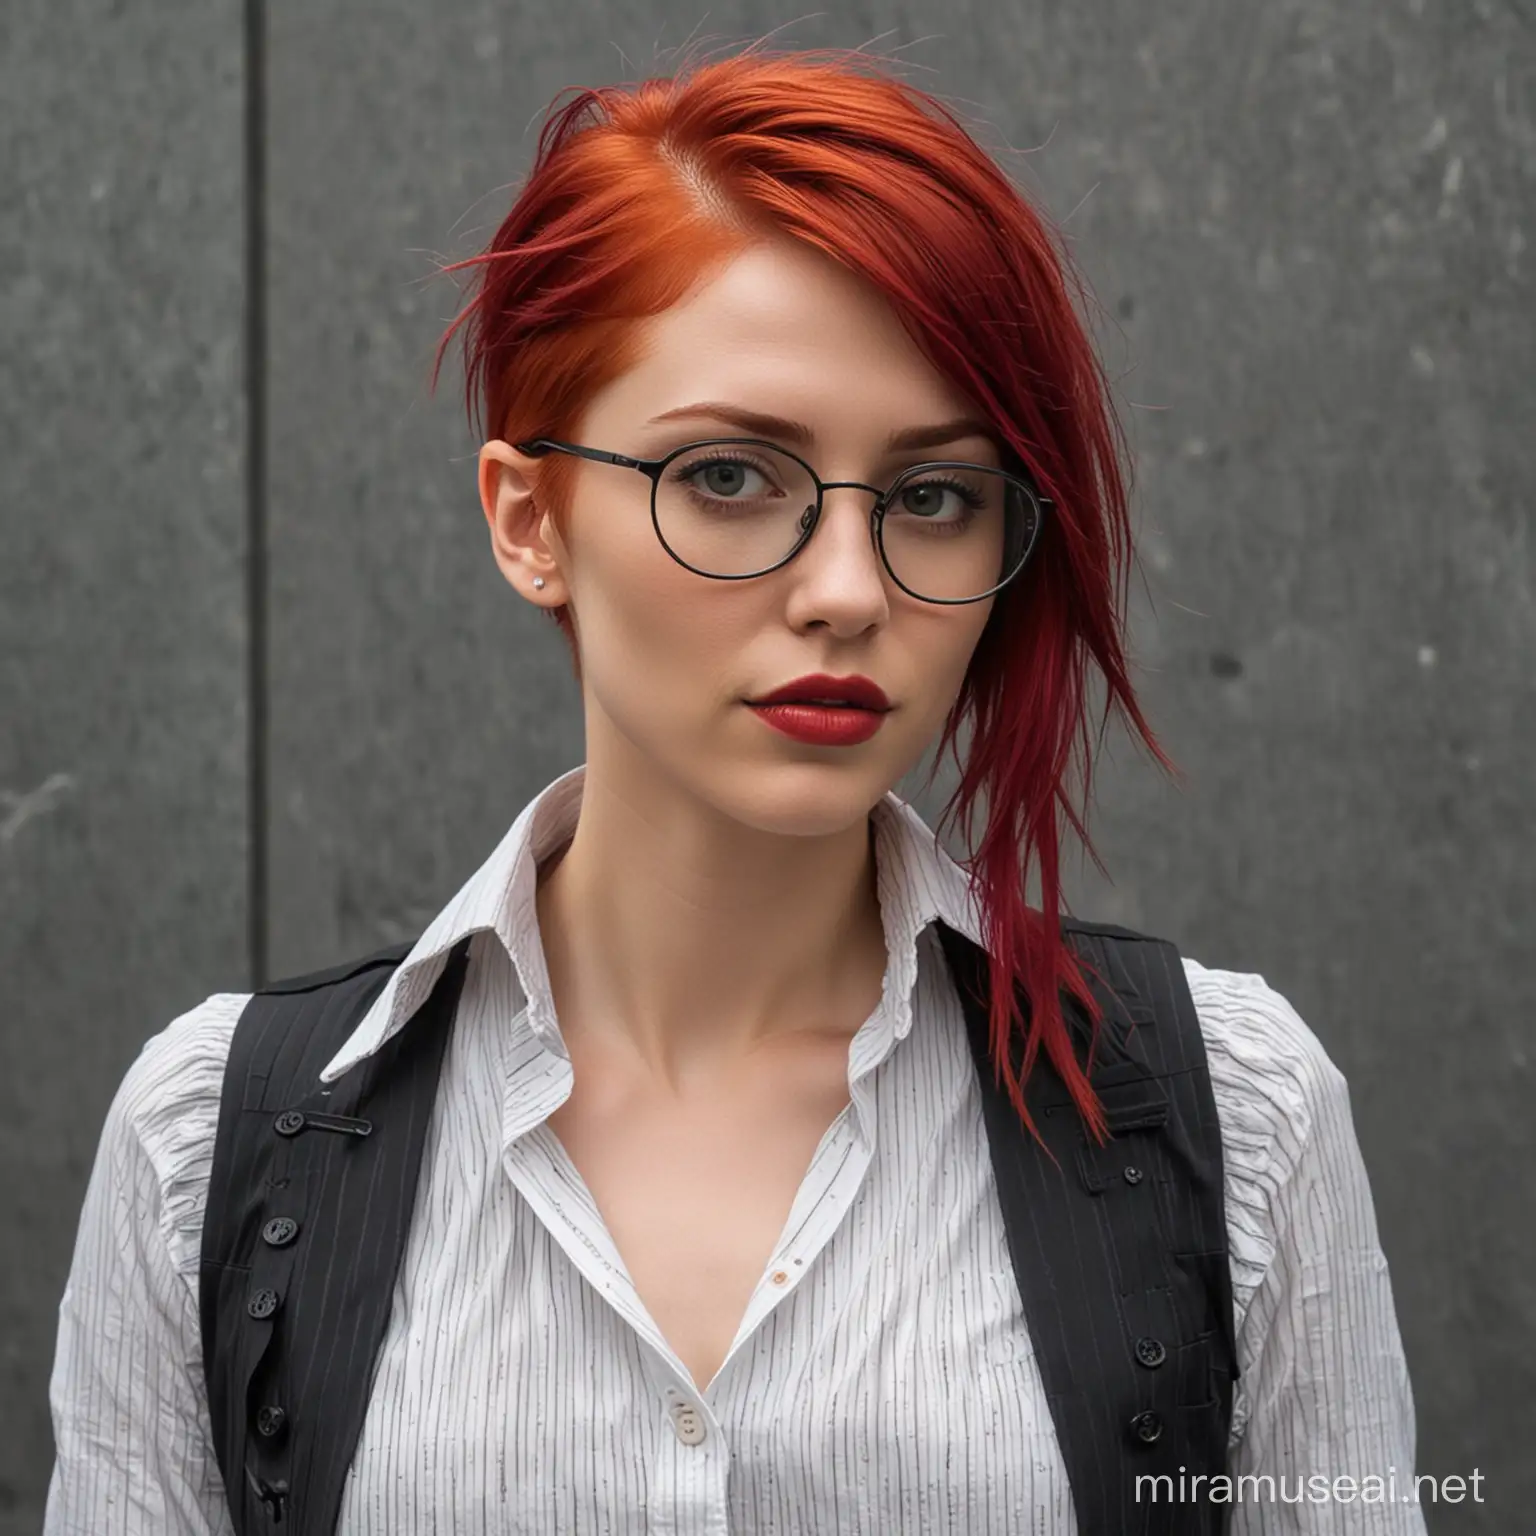 a cyberpunk woman with scarlet red hair resting on the right and almost shaved side hair on the left, she wears a a white thin striped blouse slightly open on the first row of buttons and over the blouse over a dark vest, she wears eyeglasses, she has a dark lipstick